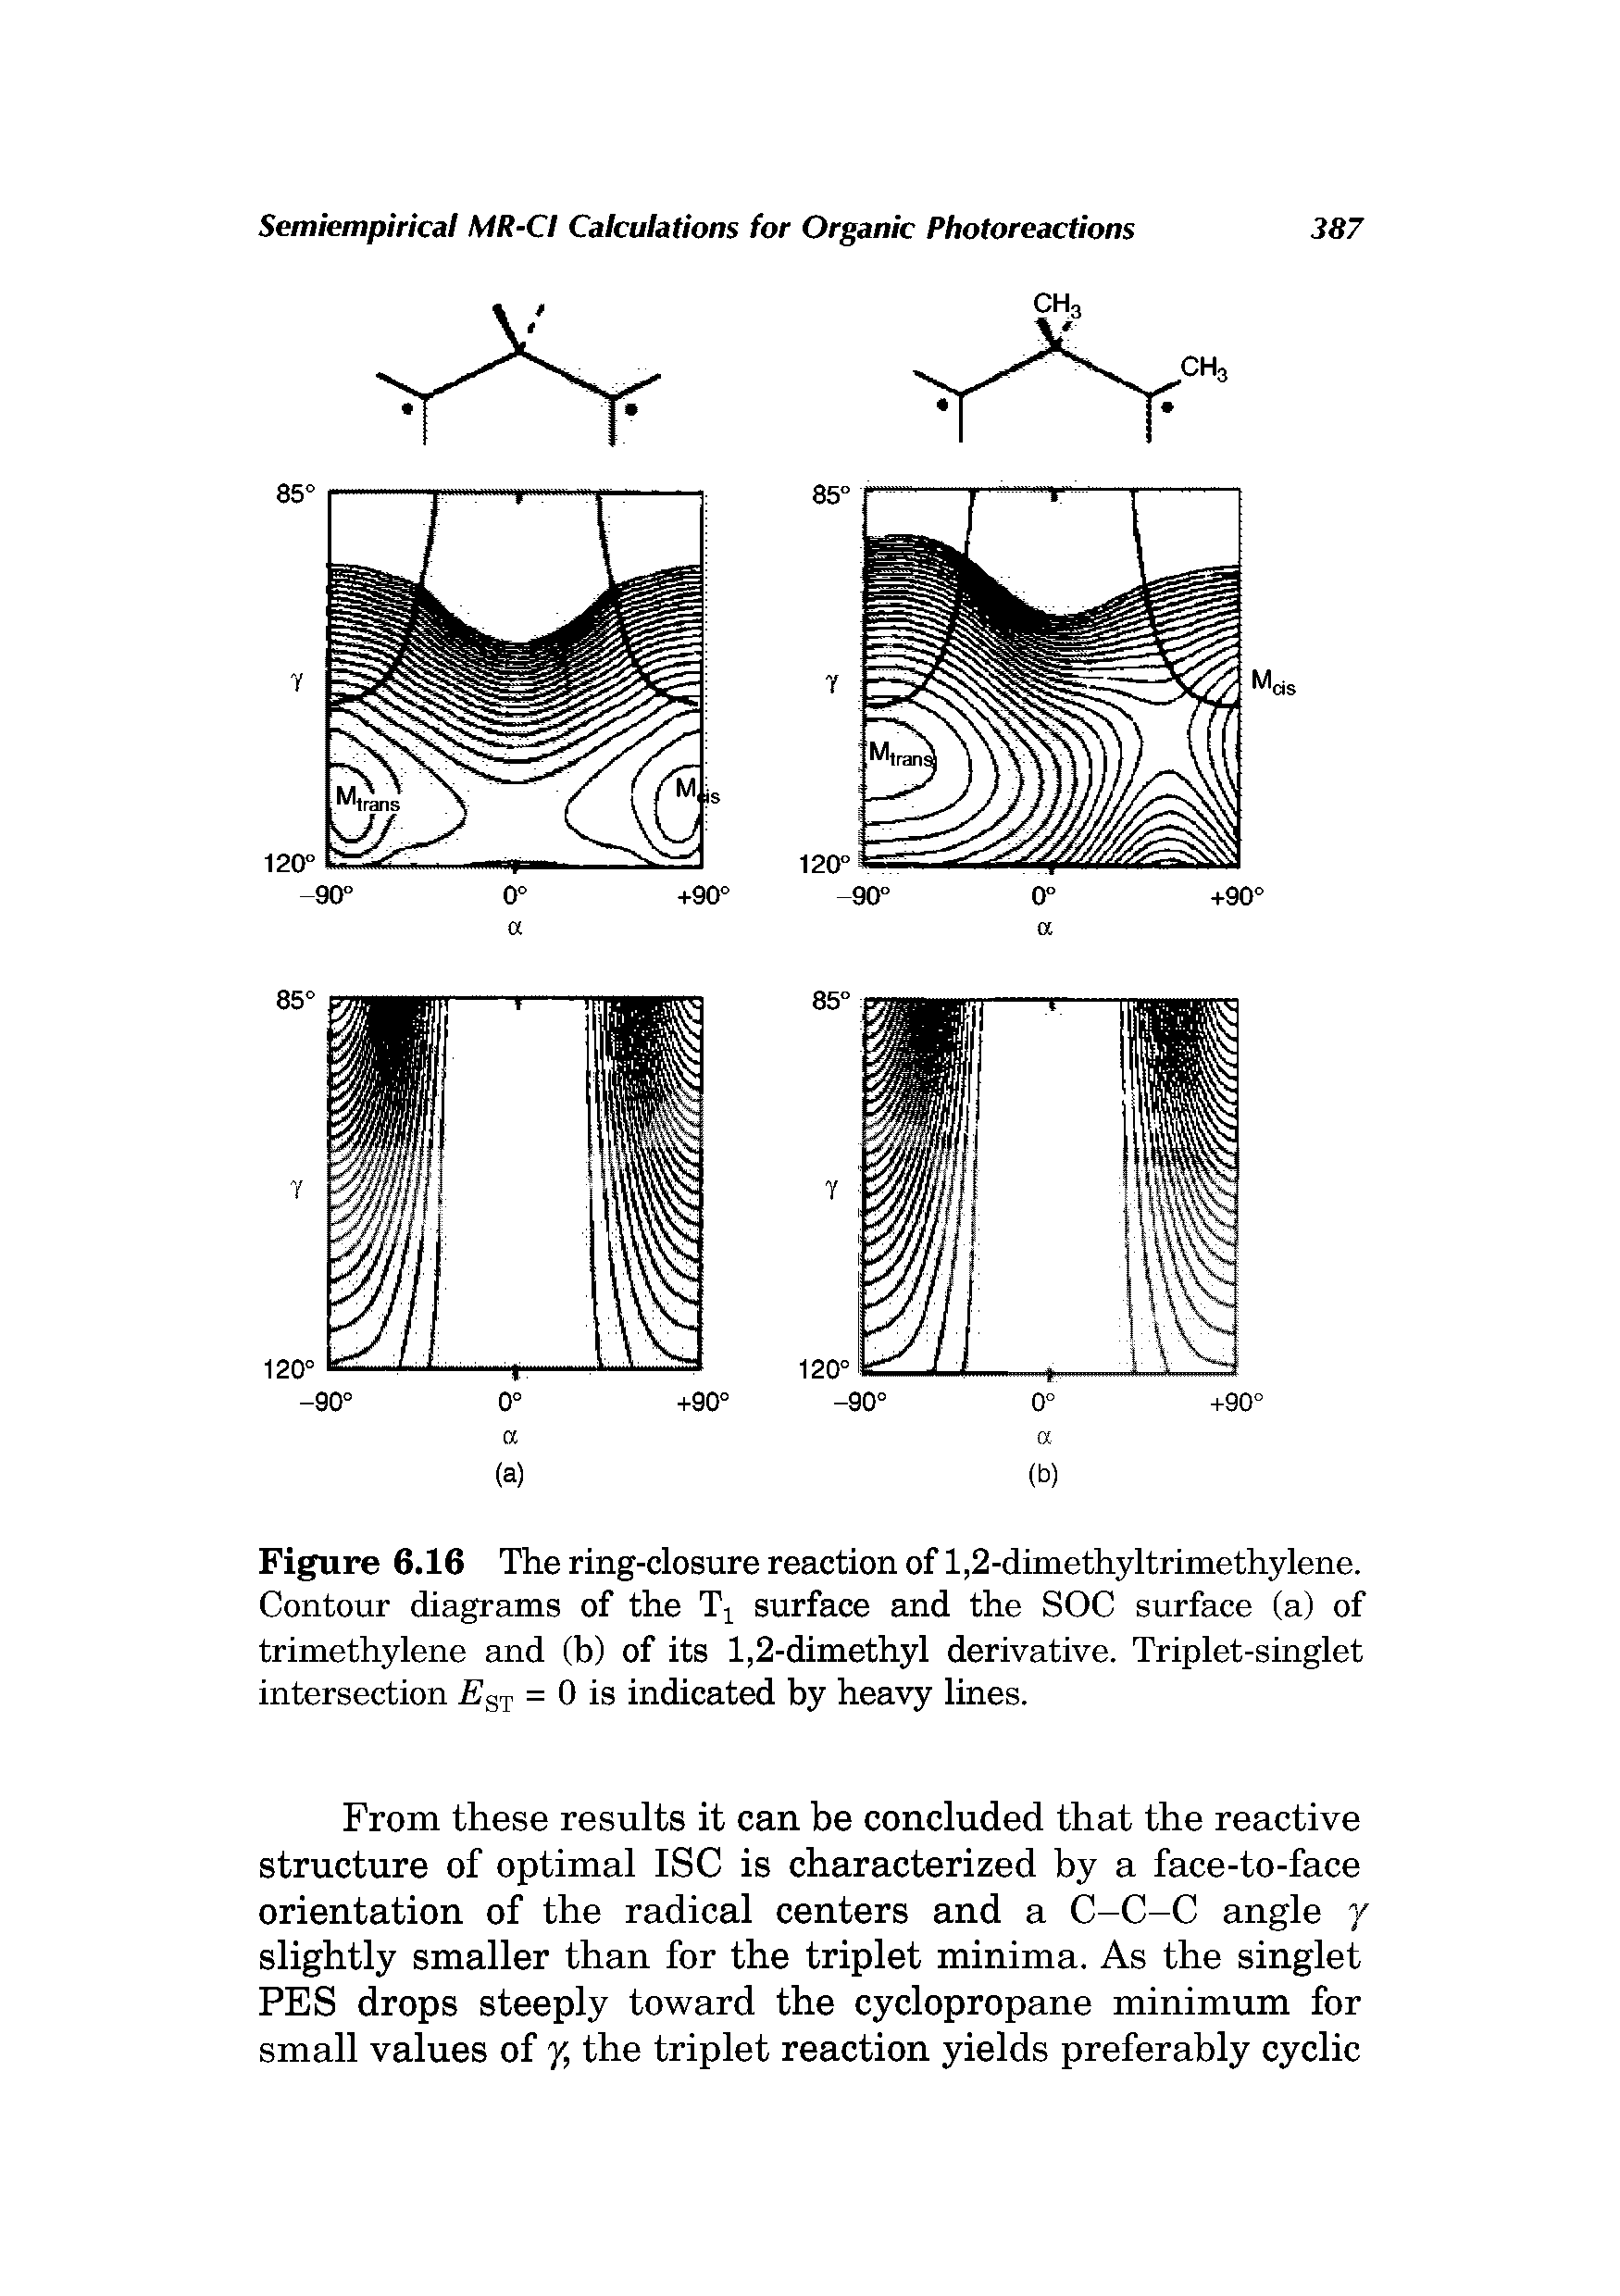 Figure 6.16 The ring-closure reaction of 1,2-dimethyltrimethylene. Contour diagrams of the surface and the SOC surface (a) of trimethylene and (b) of its 1,2-dimethyl derivative. Triplet-singlet intersection SgT = 0 is indicated by heavy lines.